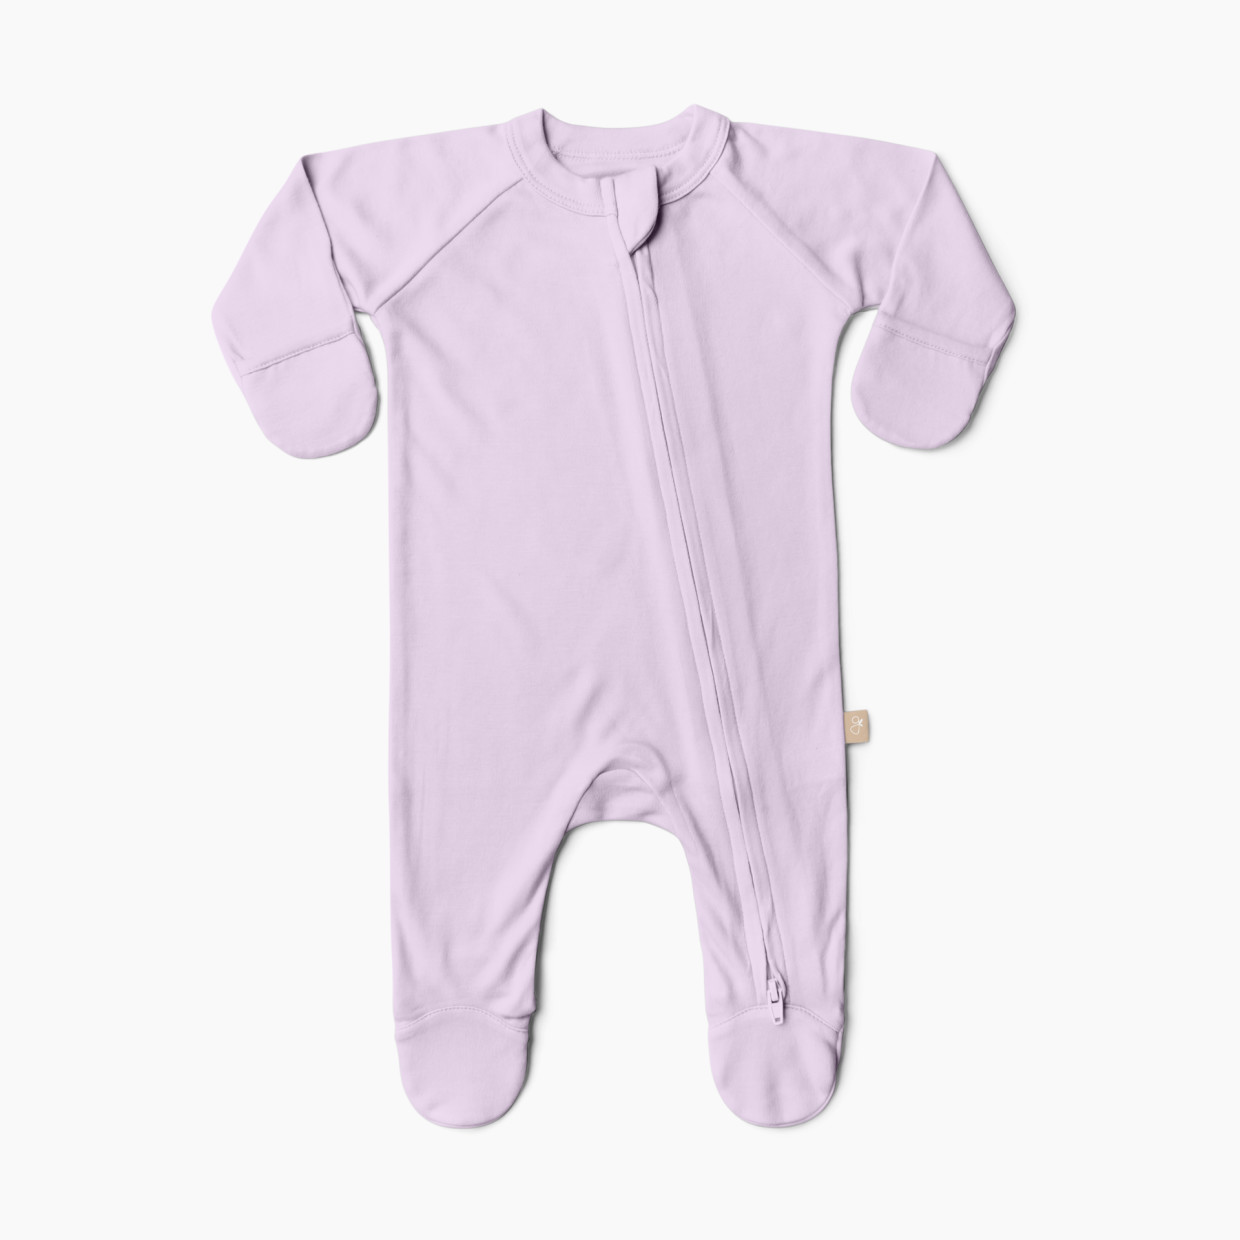 Goumi Kids x Babylist Grow With You Footie - Loose Fit - Lilac, Newborn.